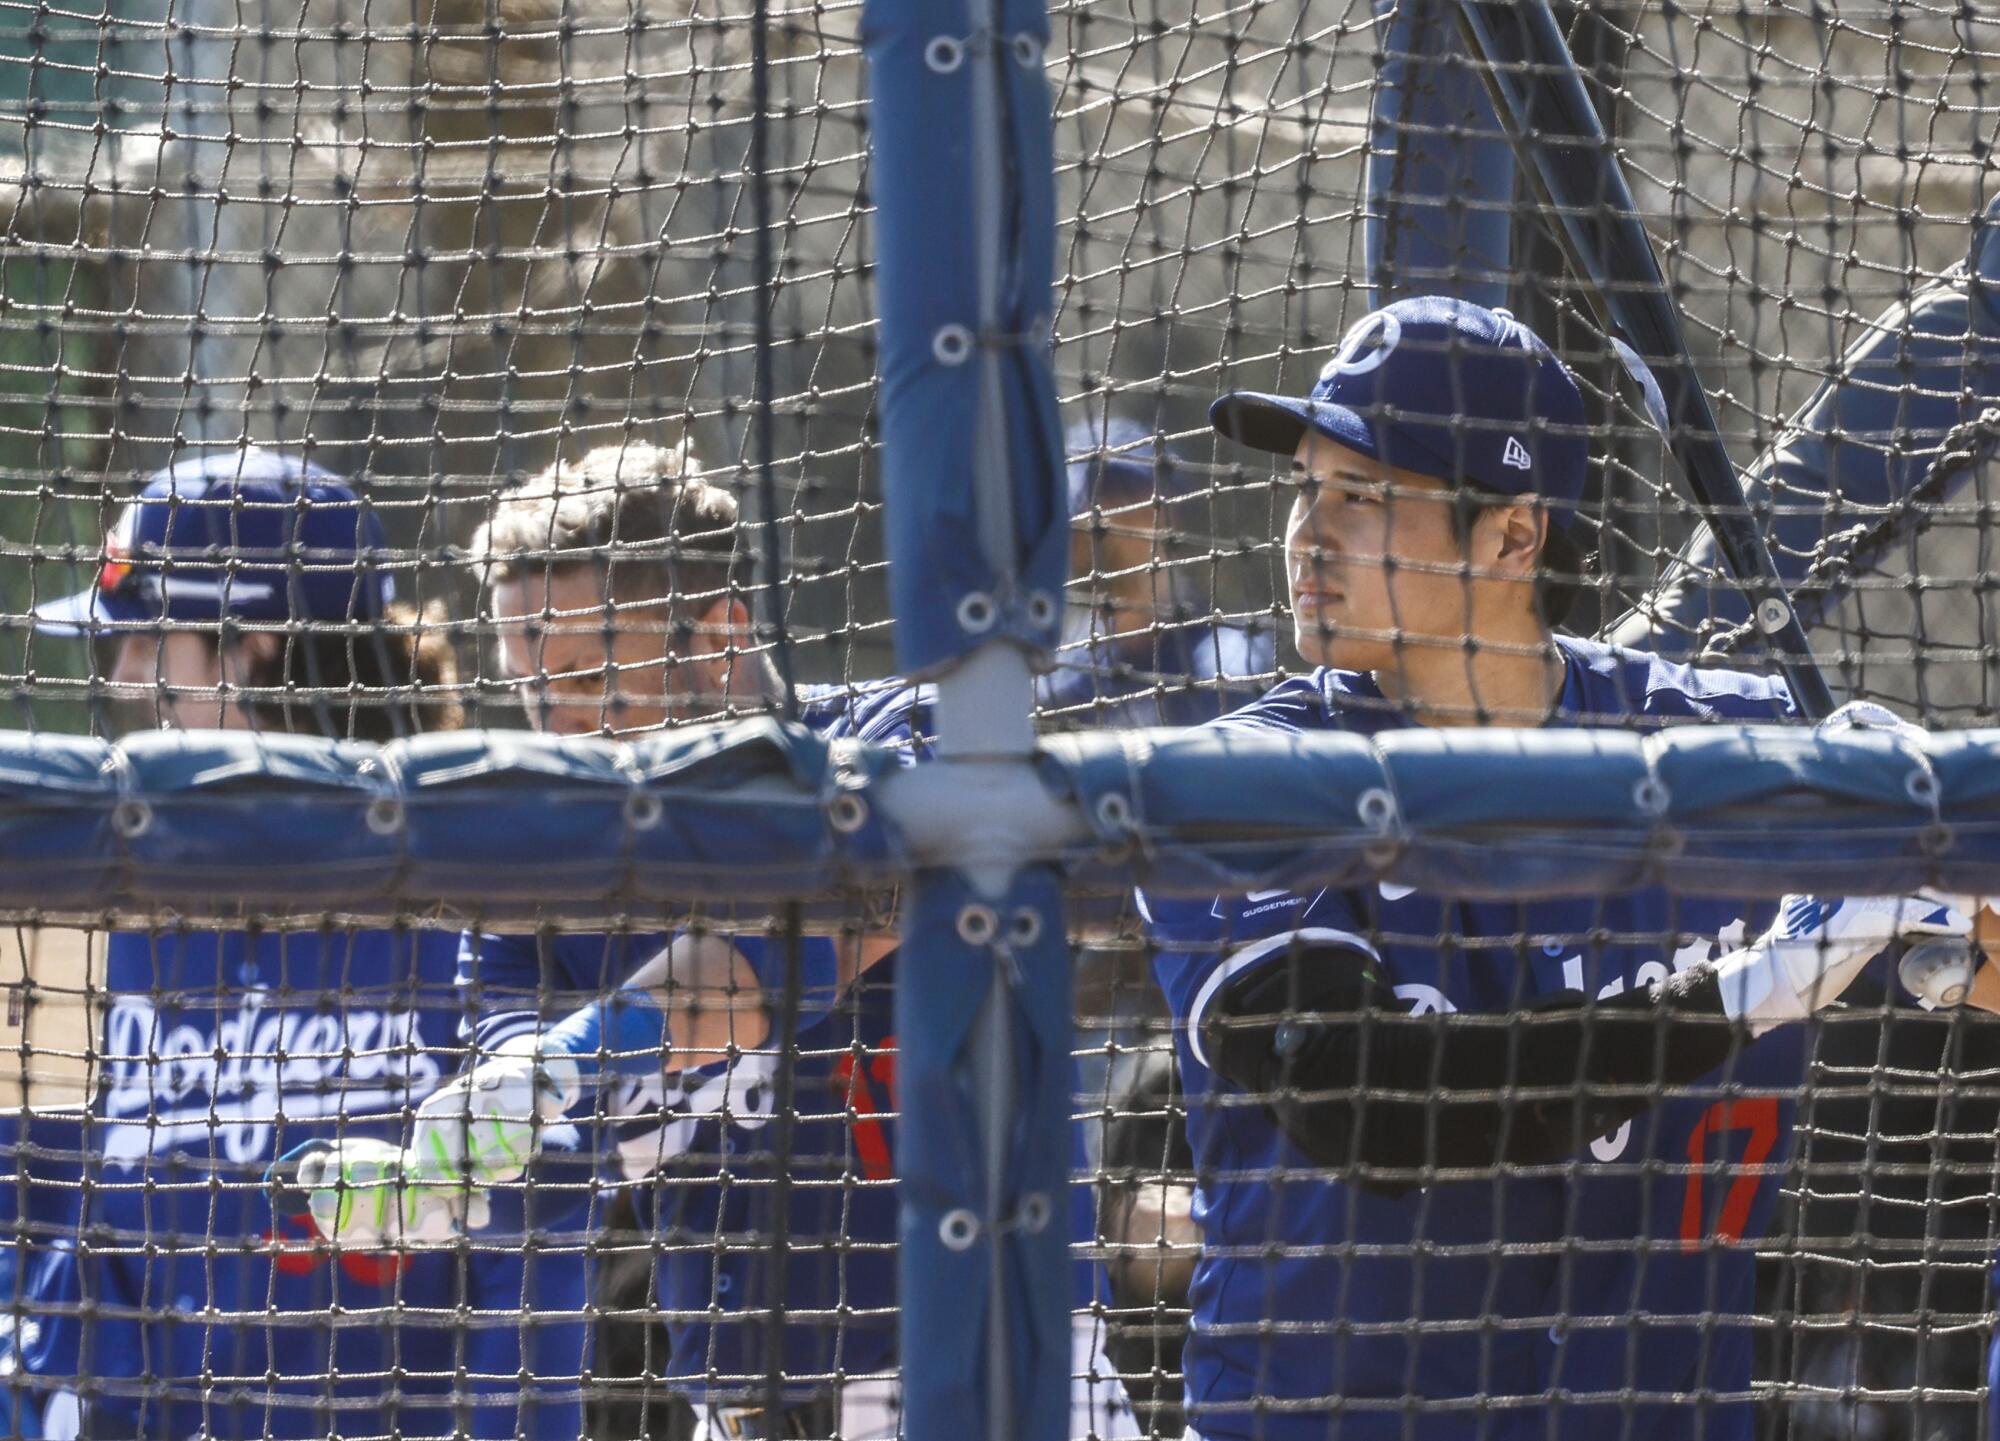 Shohei Ohtani, right, in the batting cage at Dodgers spring training.